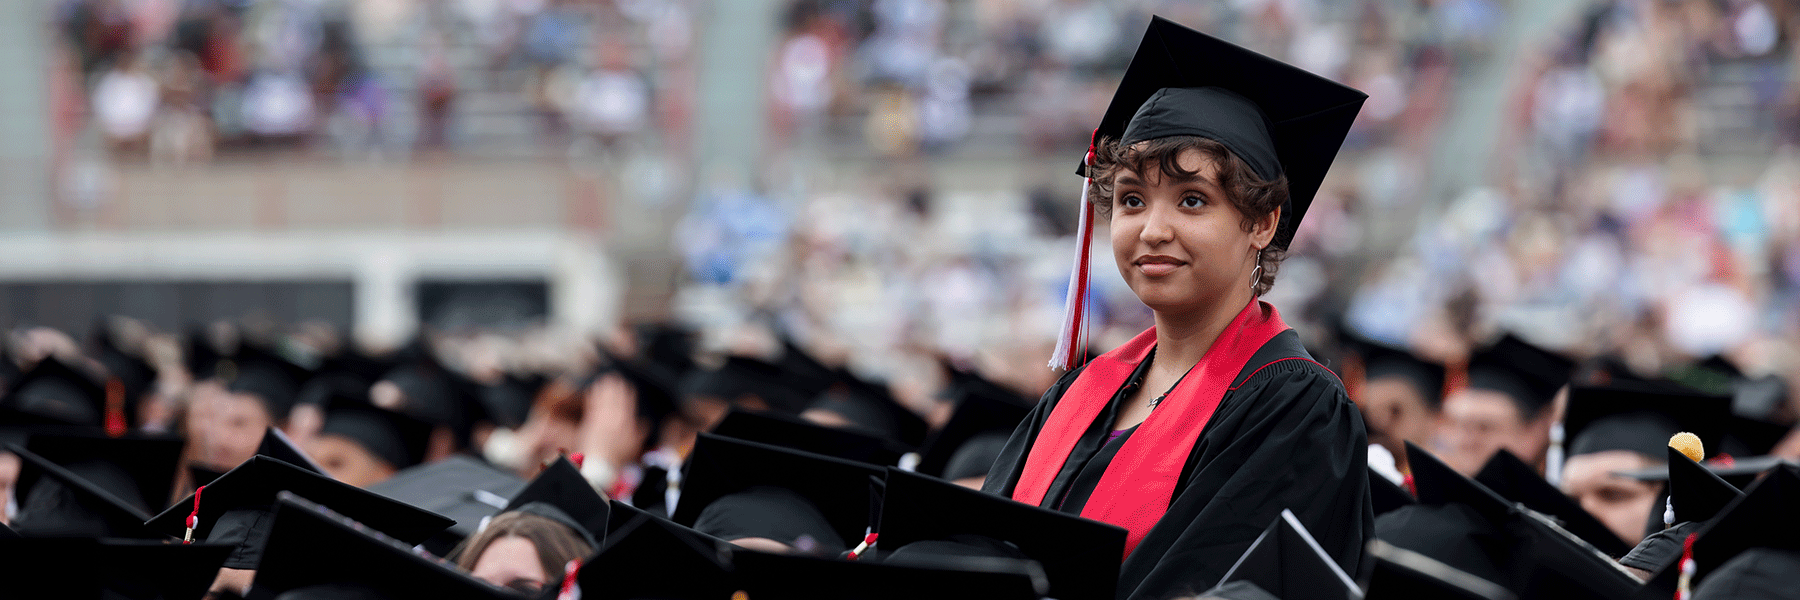 A female graduate standing in the crowd at commencement.